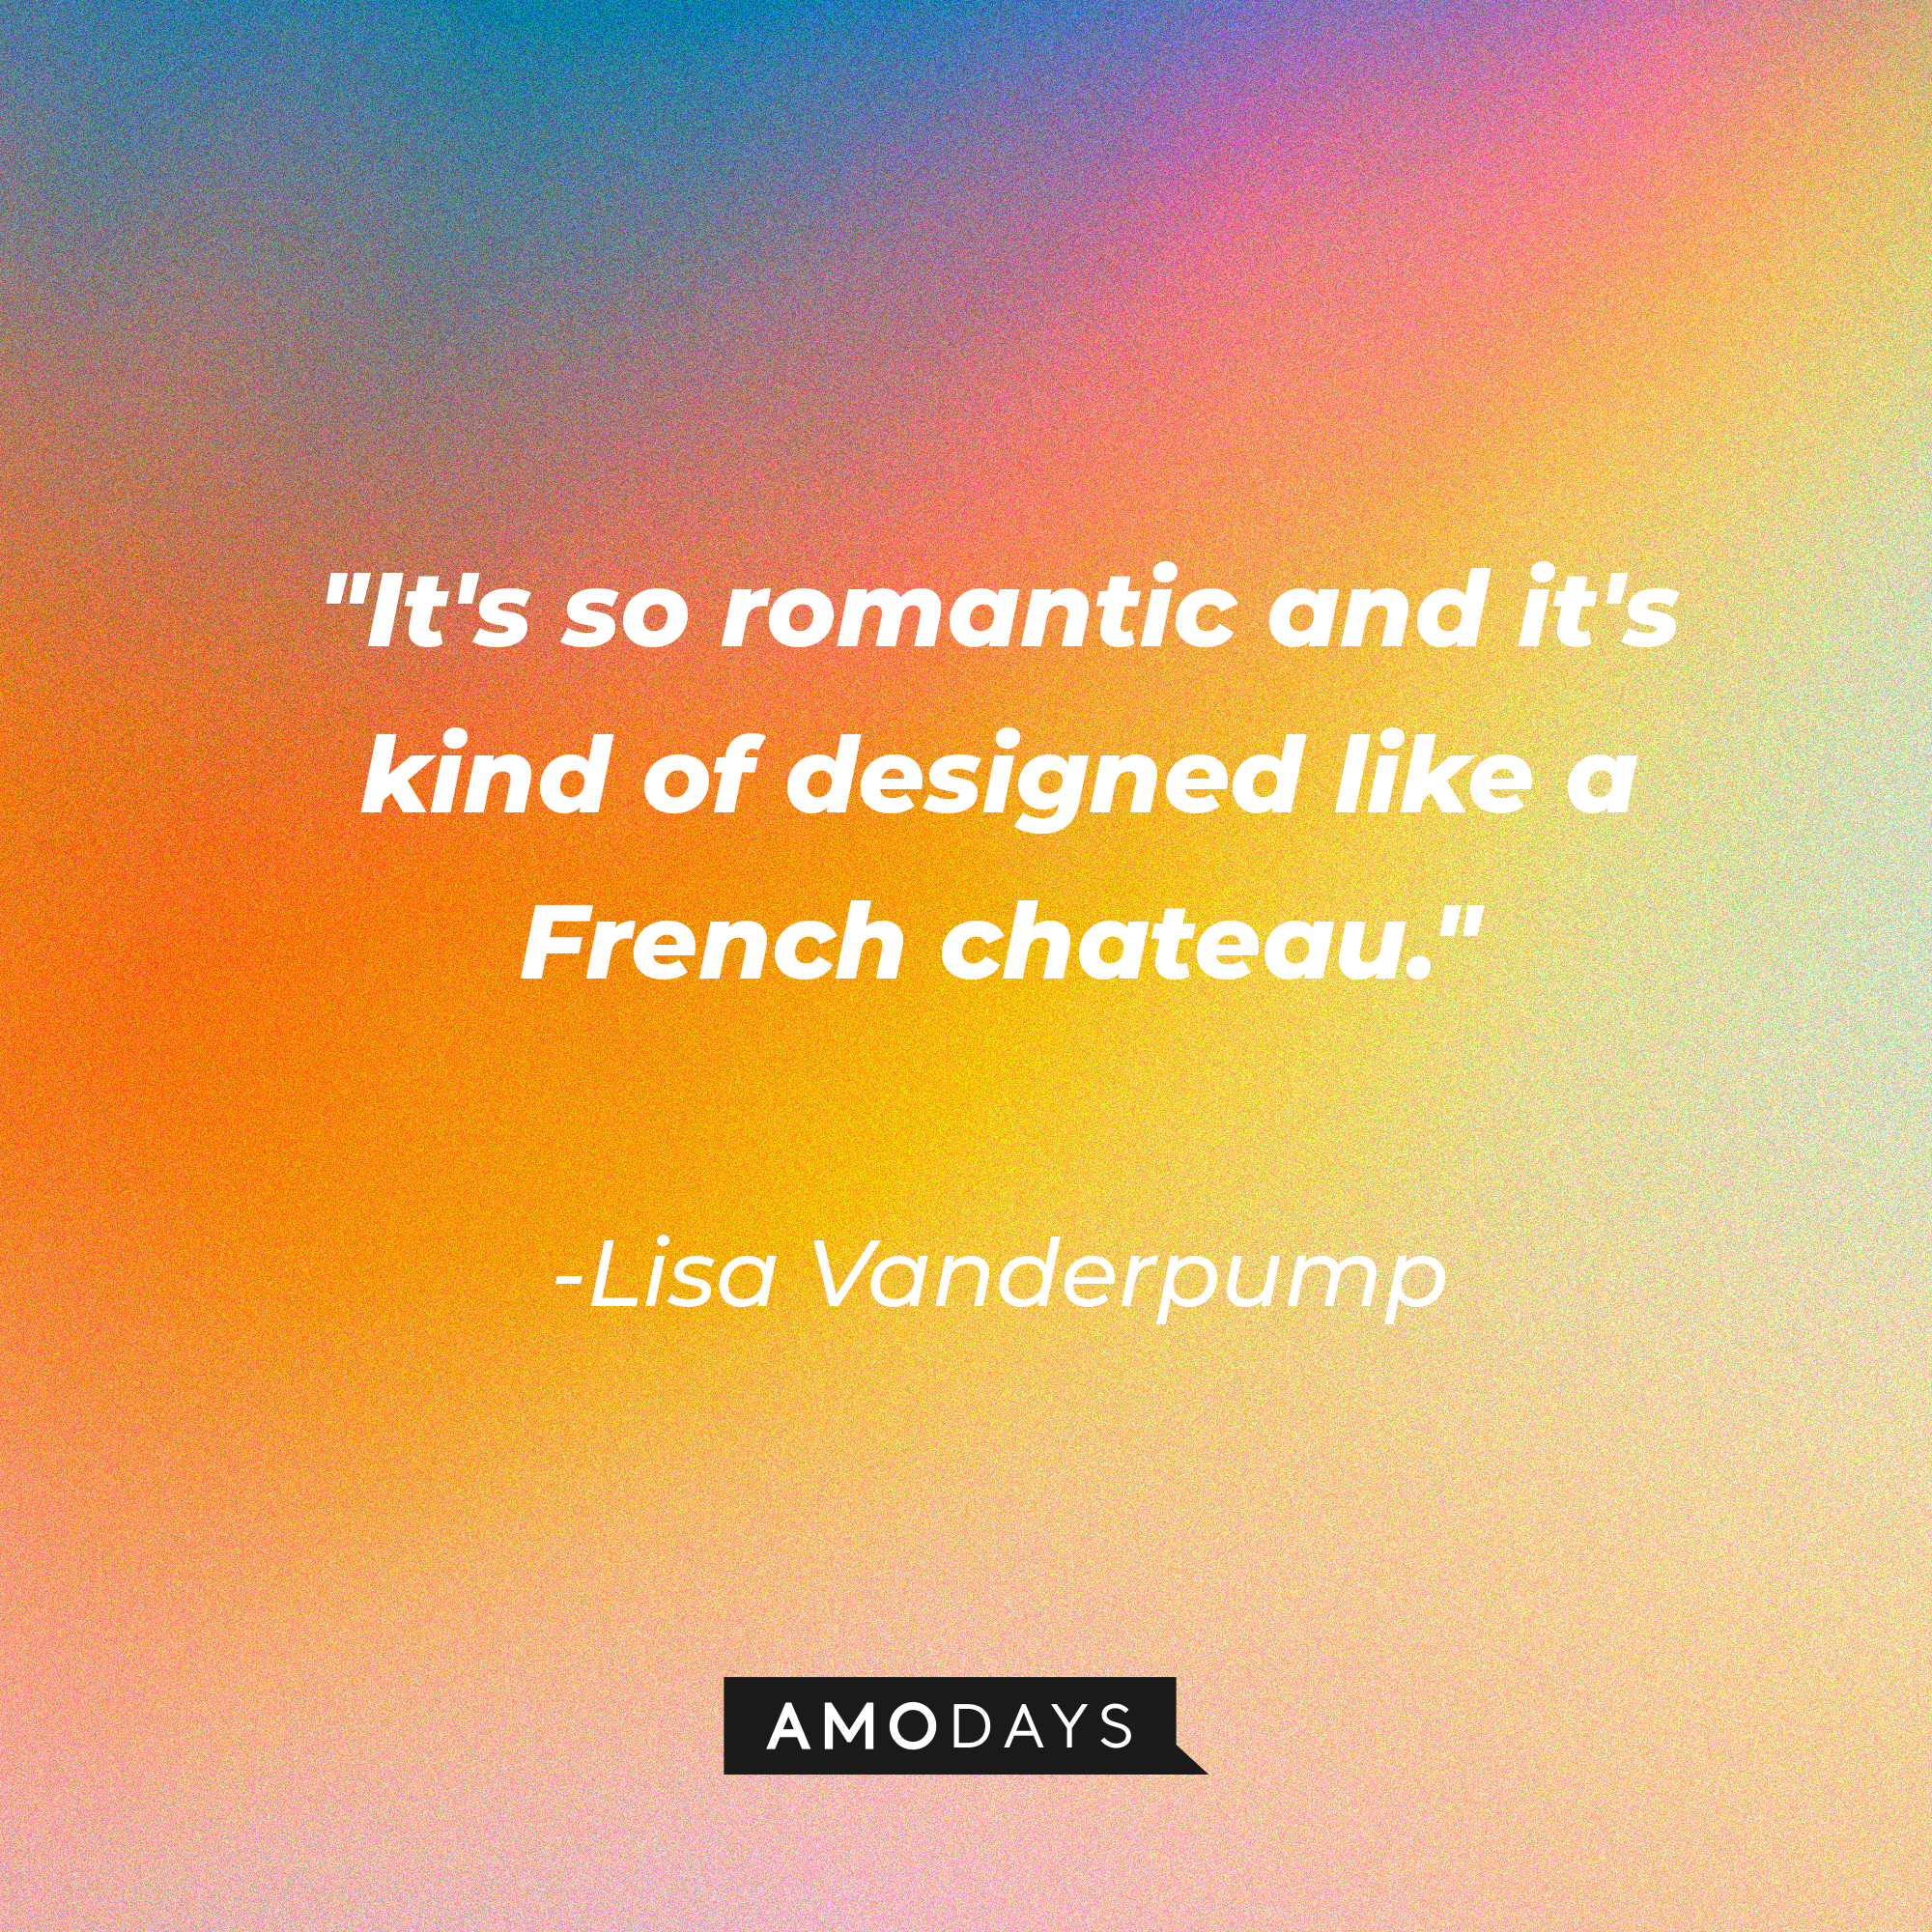 Lisa Vanderpump’s quote: "It's so romantic, and it's kind of designed like a French chateau." | Source: AmoDays